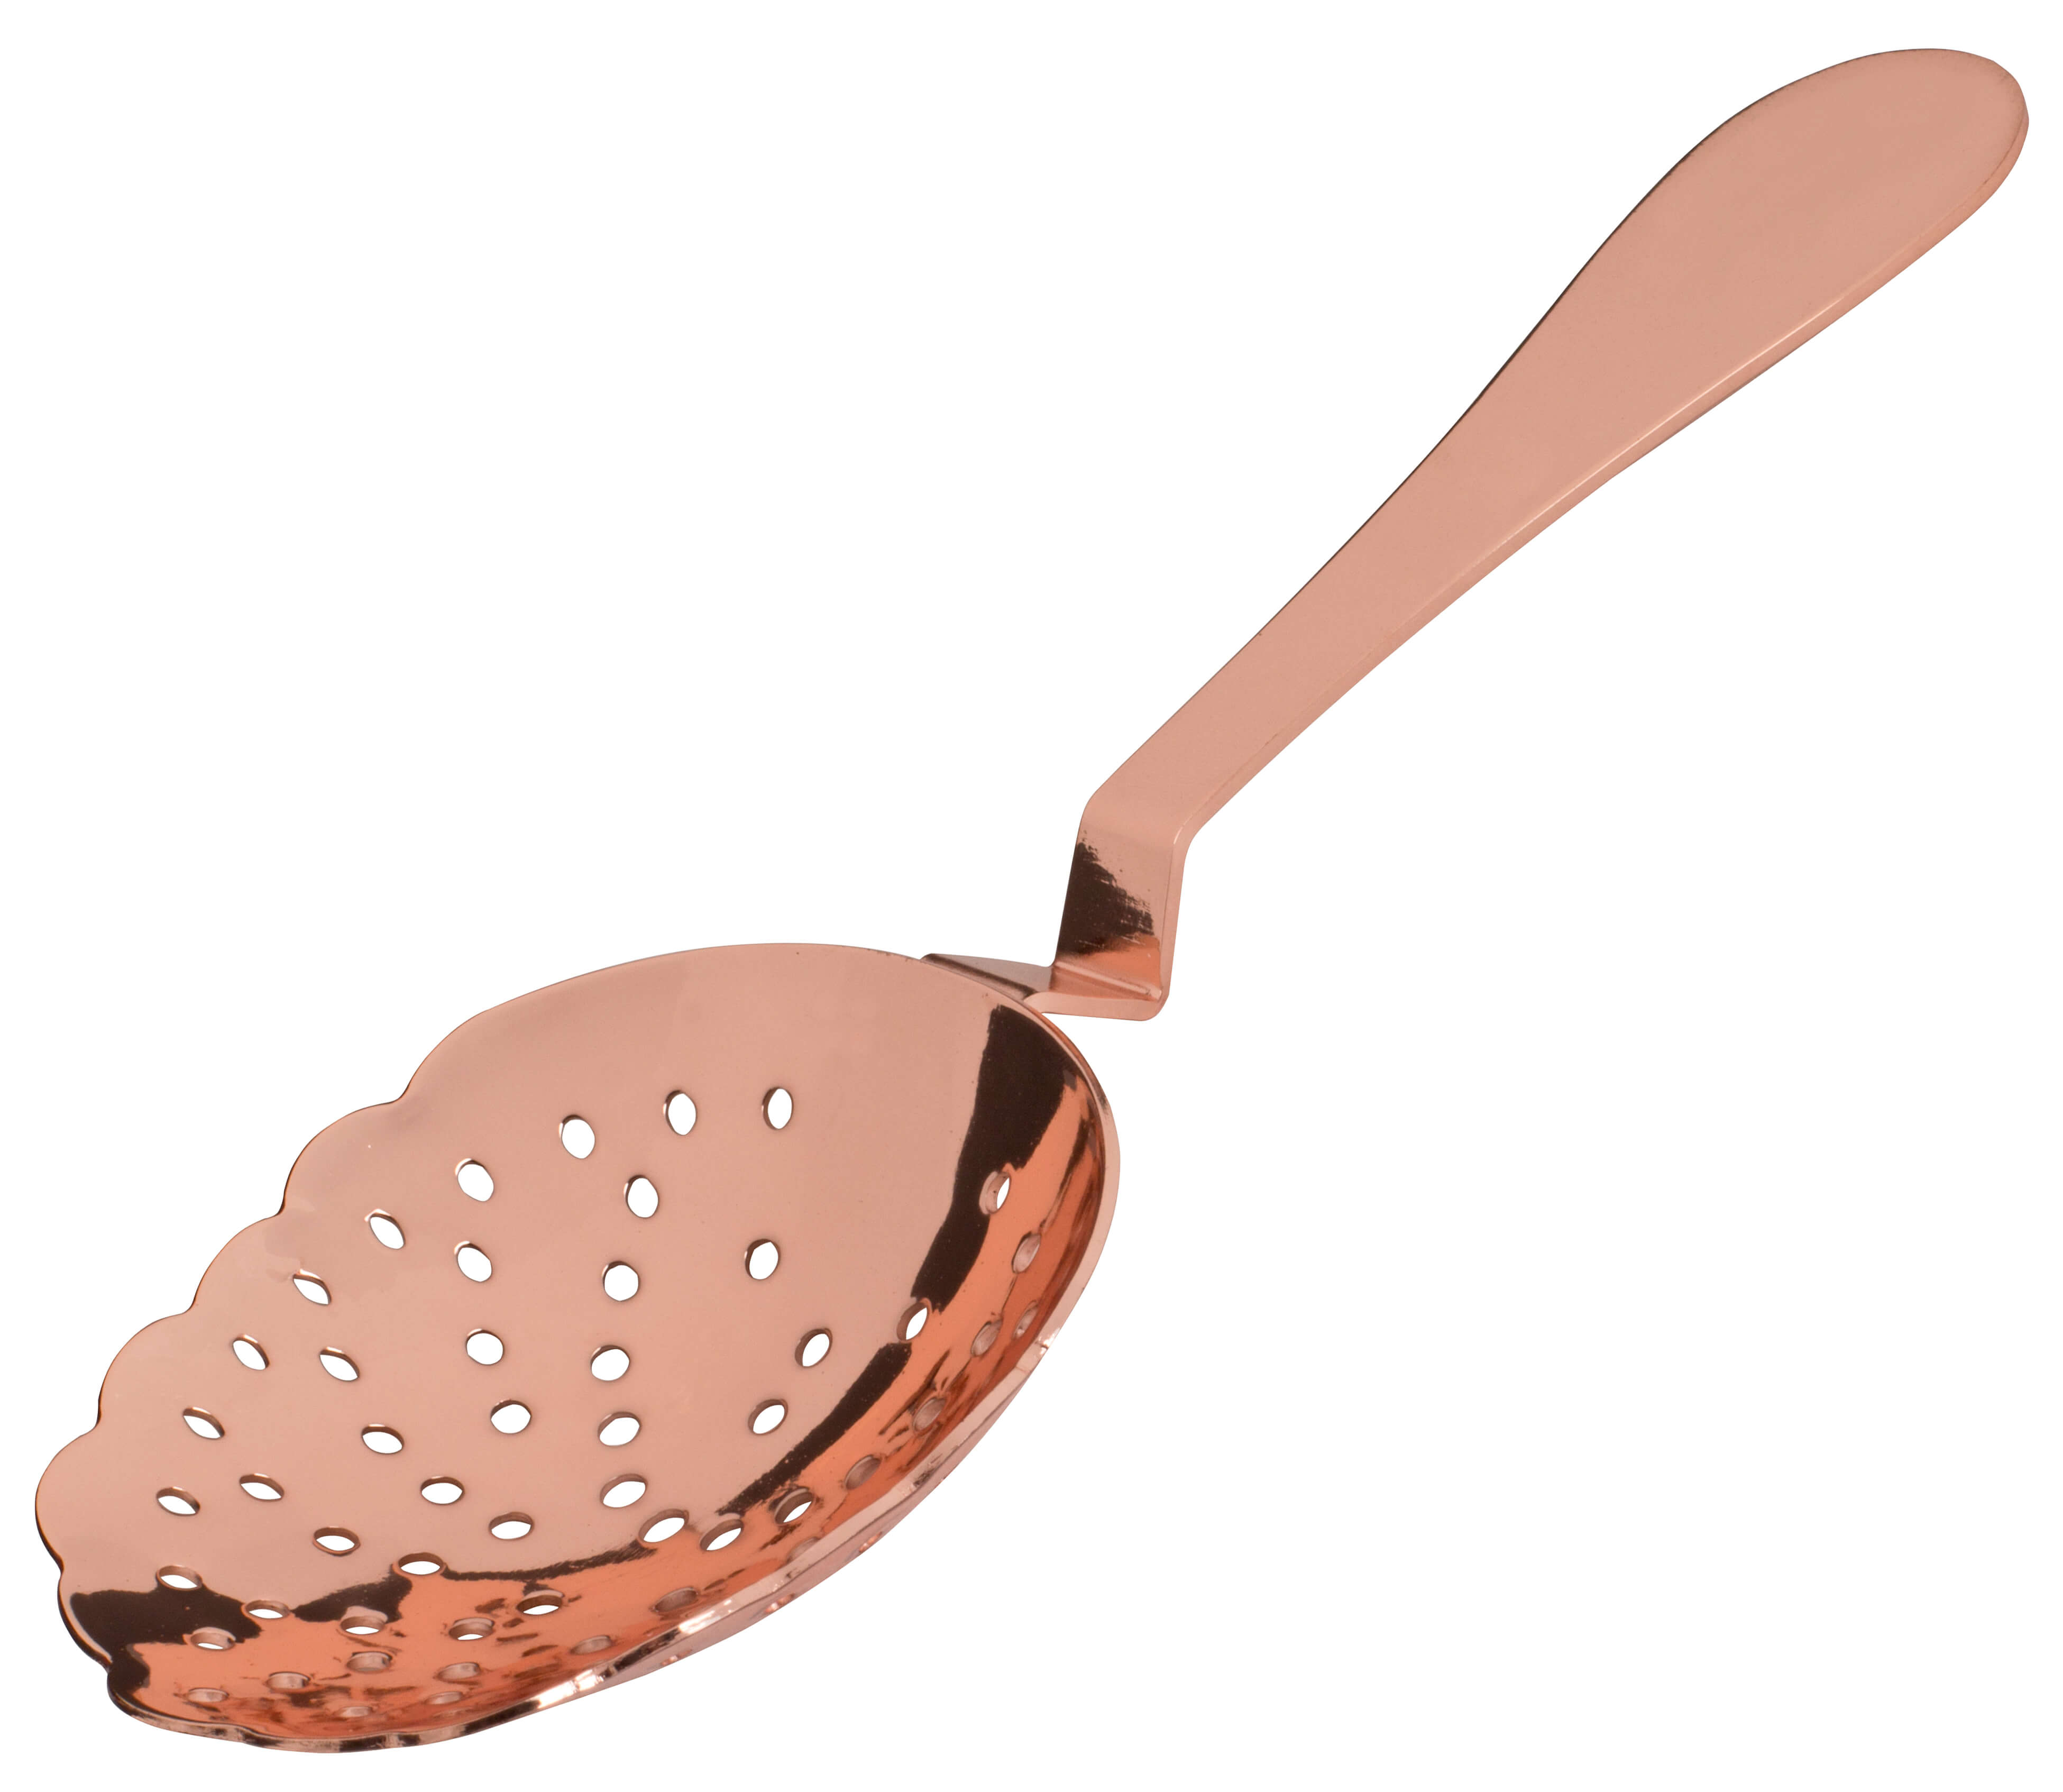 Julep Strainer Biloxi, Urban Bar, stainless steel - copper-colored (7,5cm)